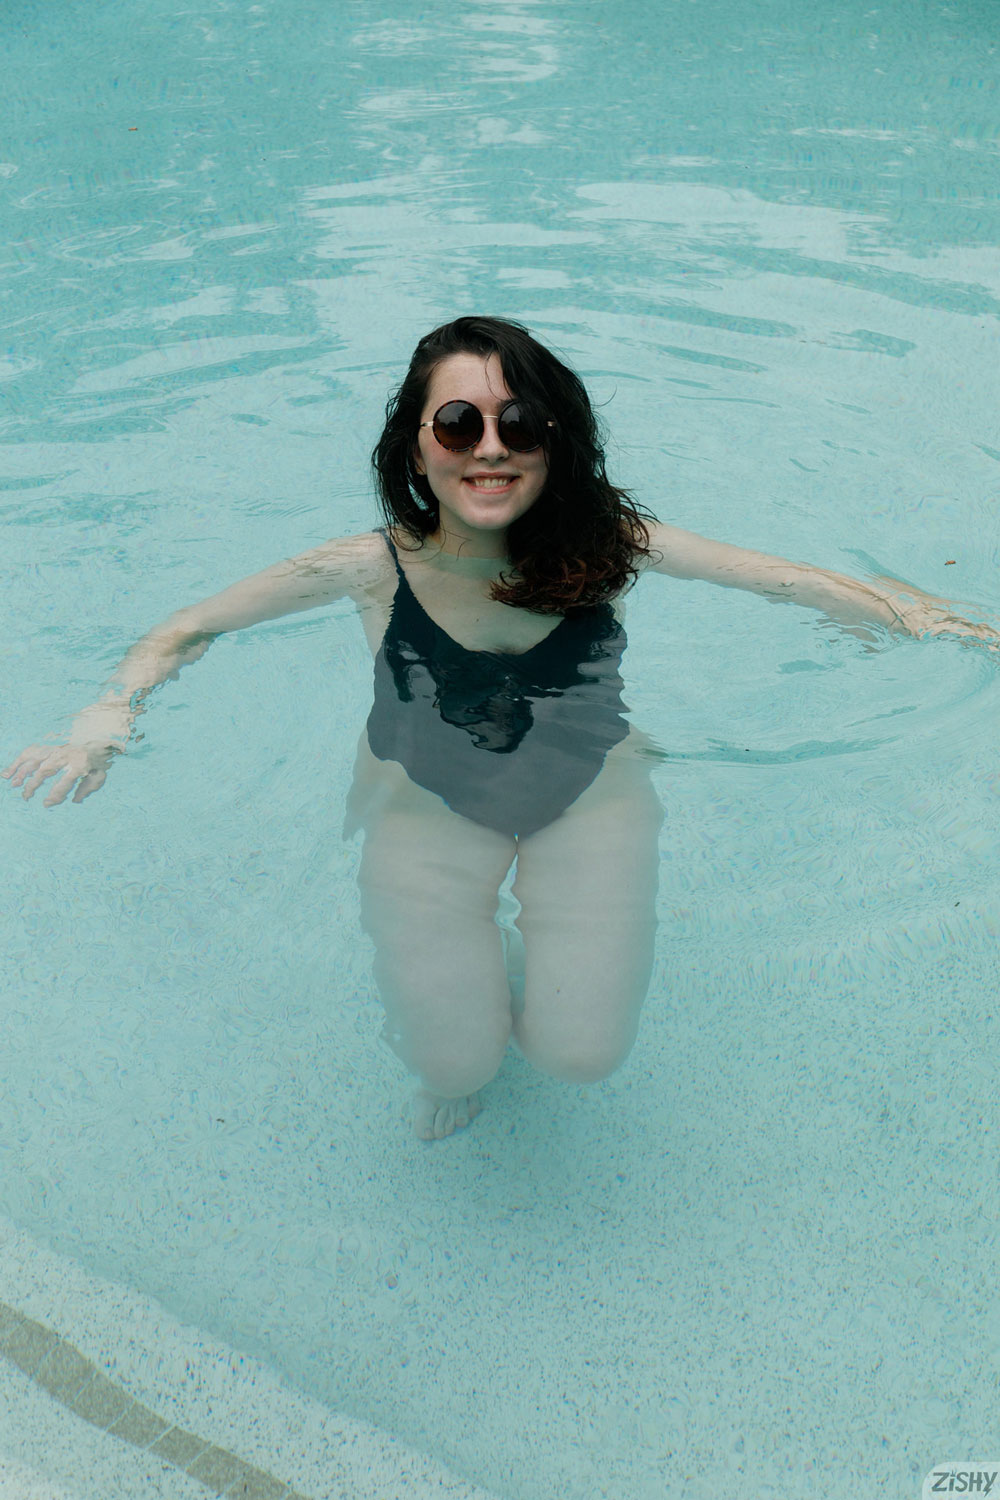 Ophelia Palantine Cools Down in the Pool